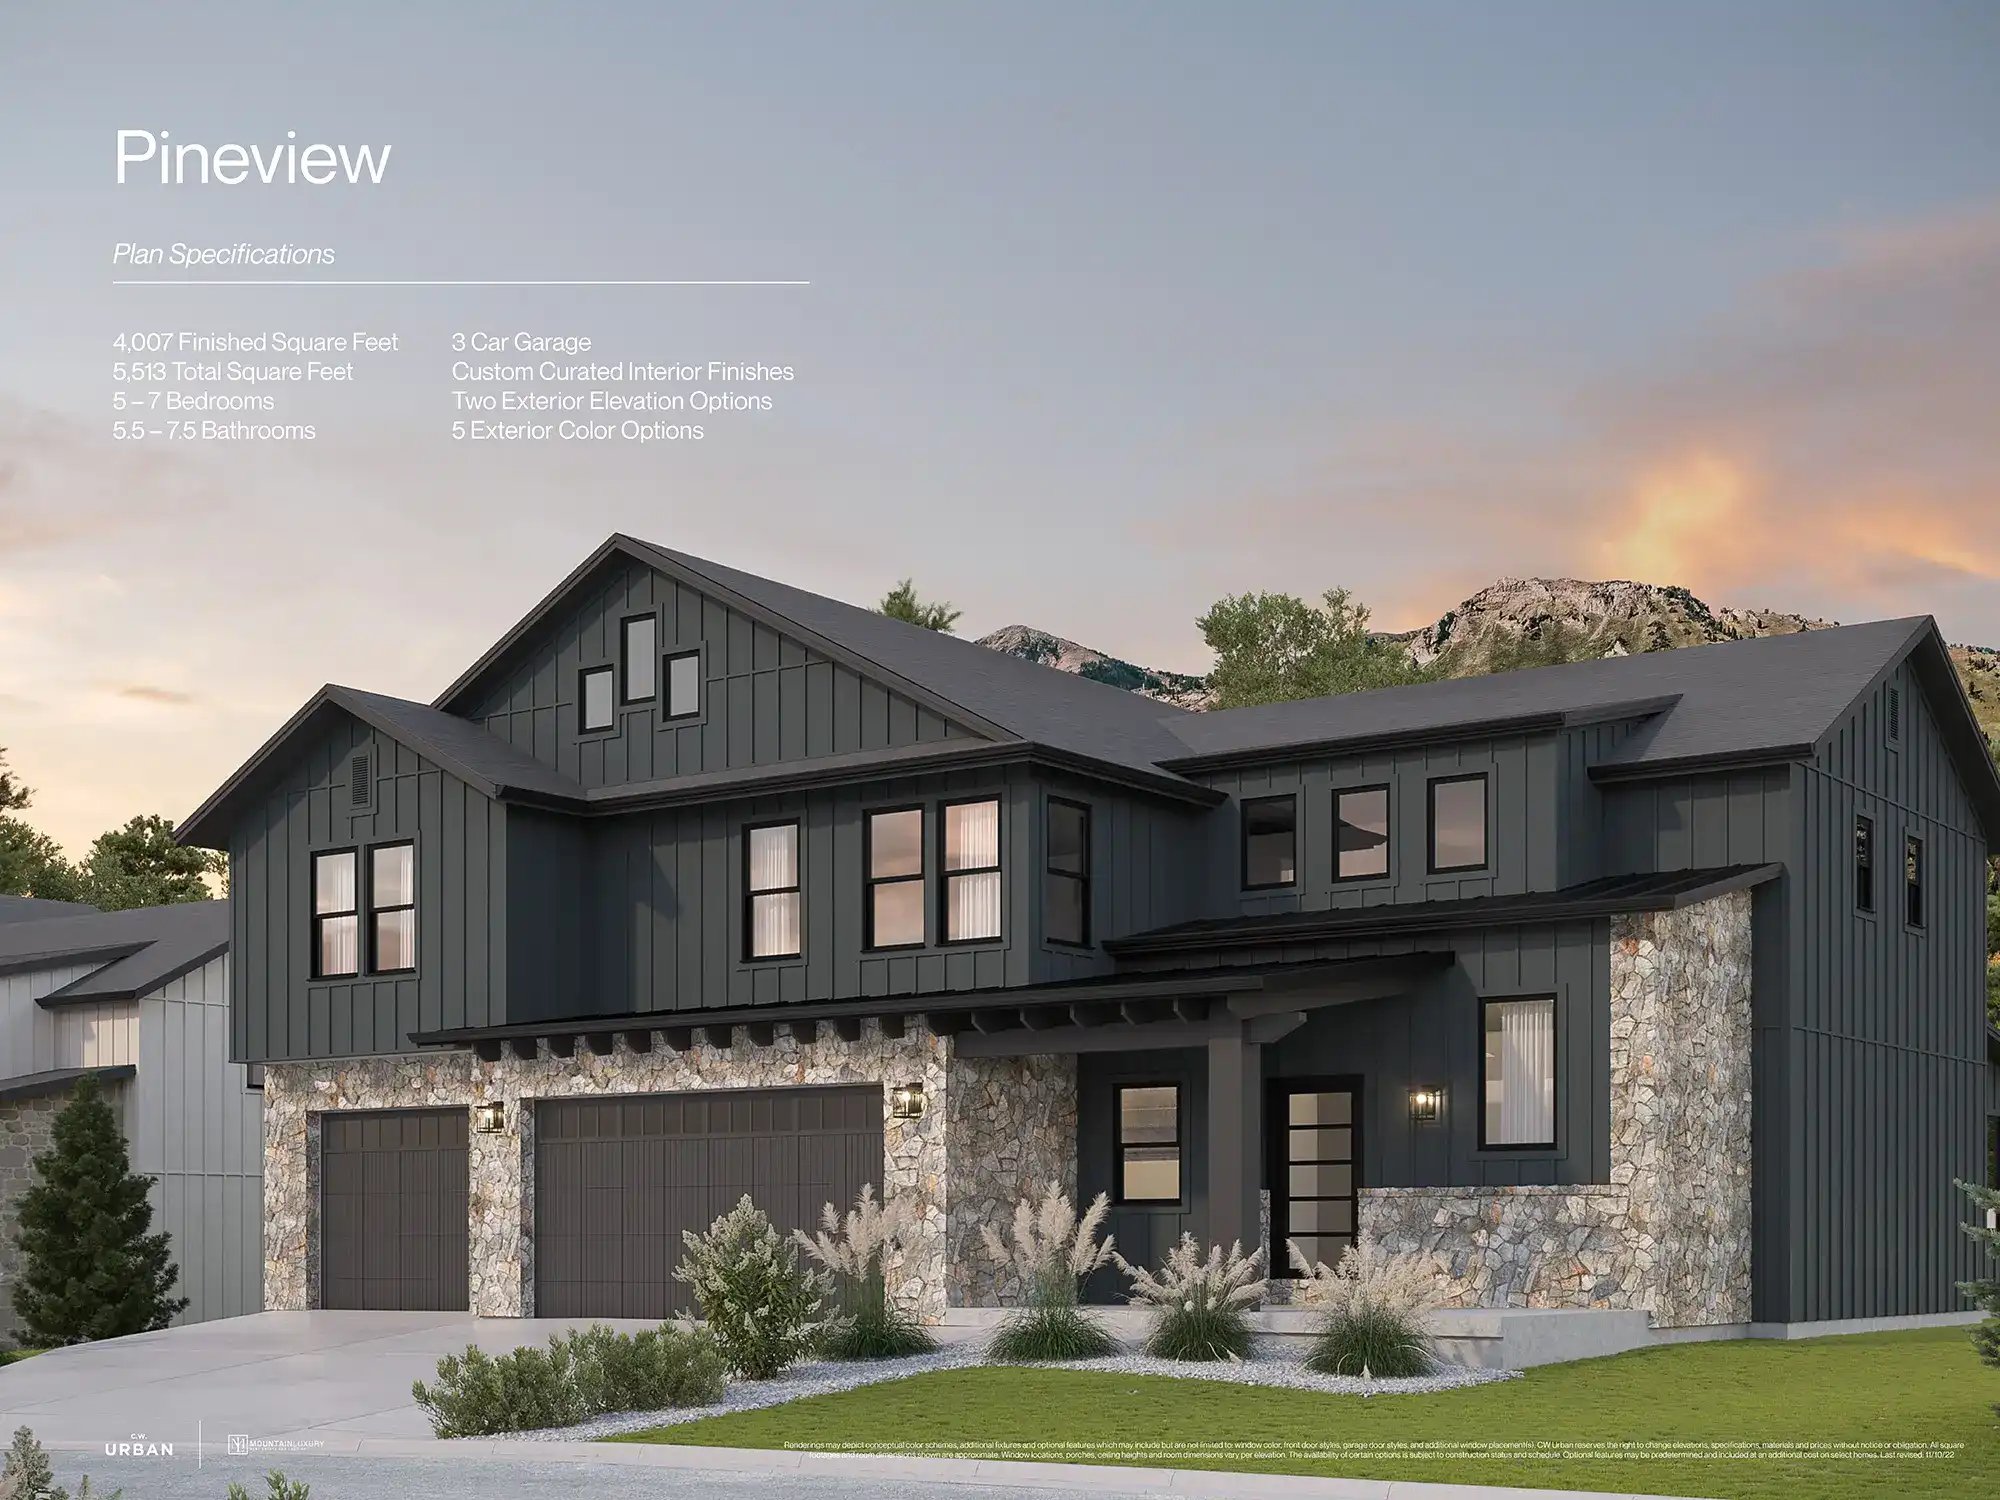 Exterior rendering of the Pineview floor plan at theBasin.